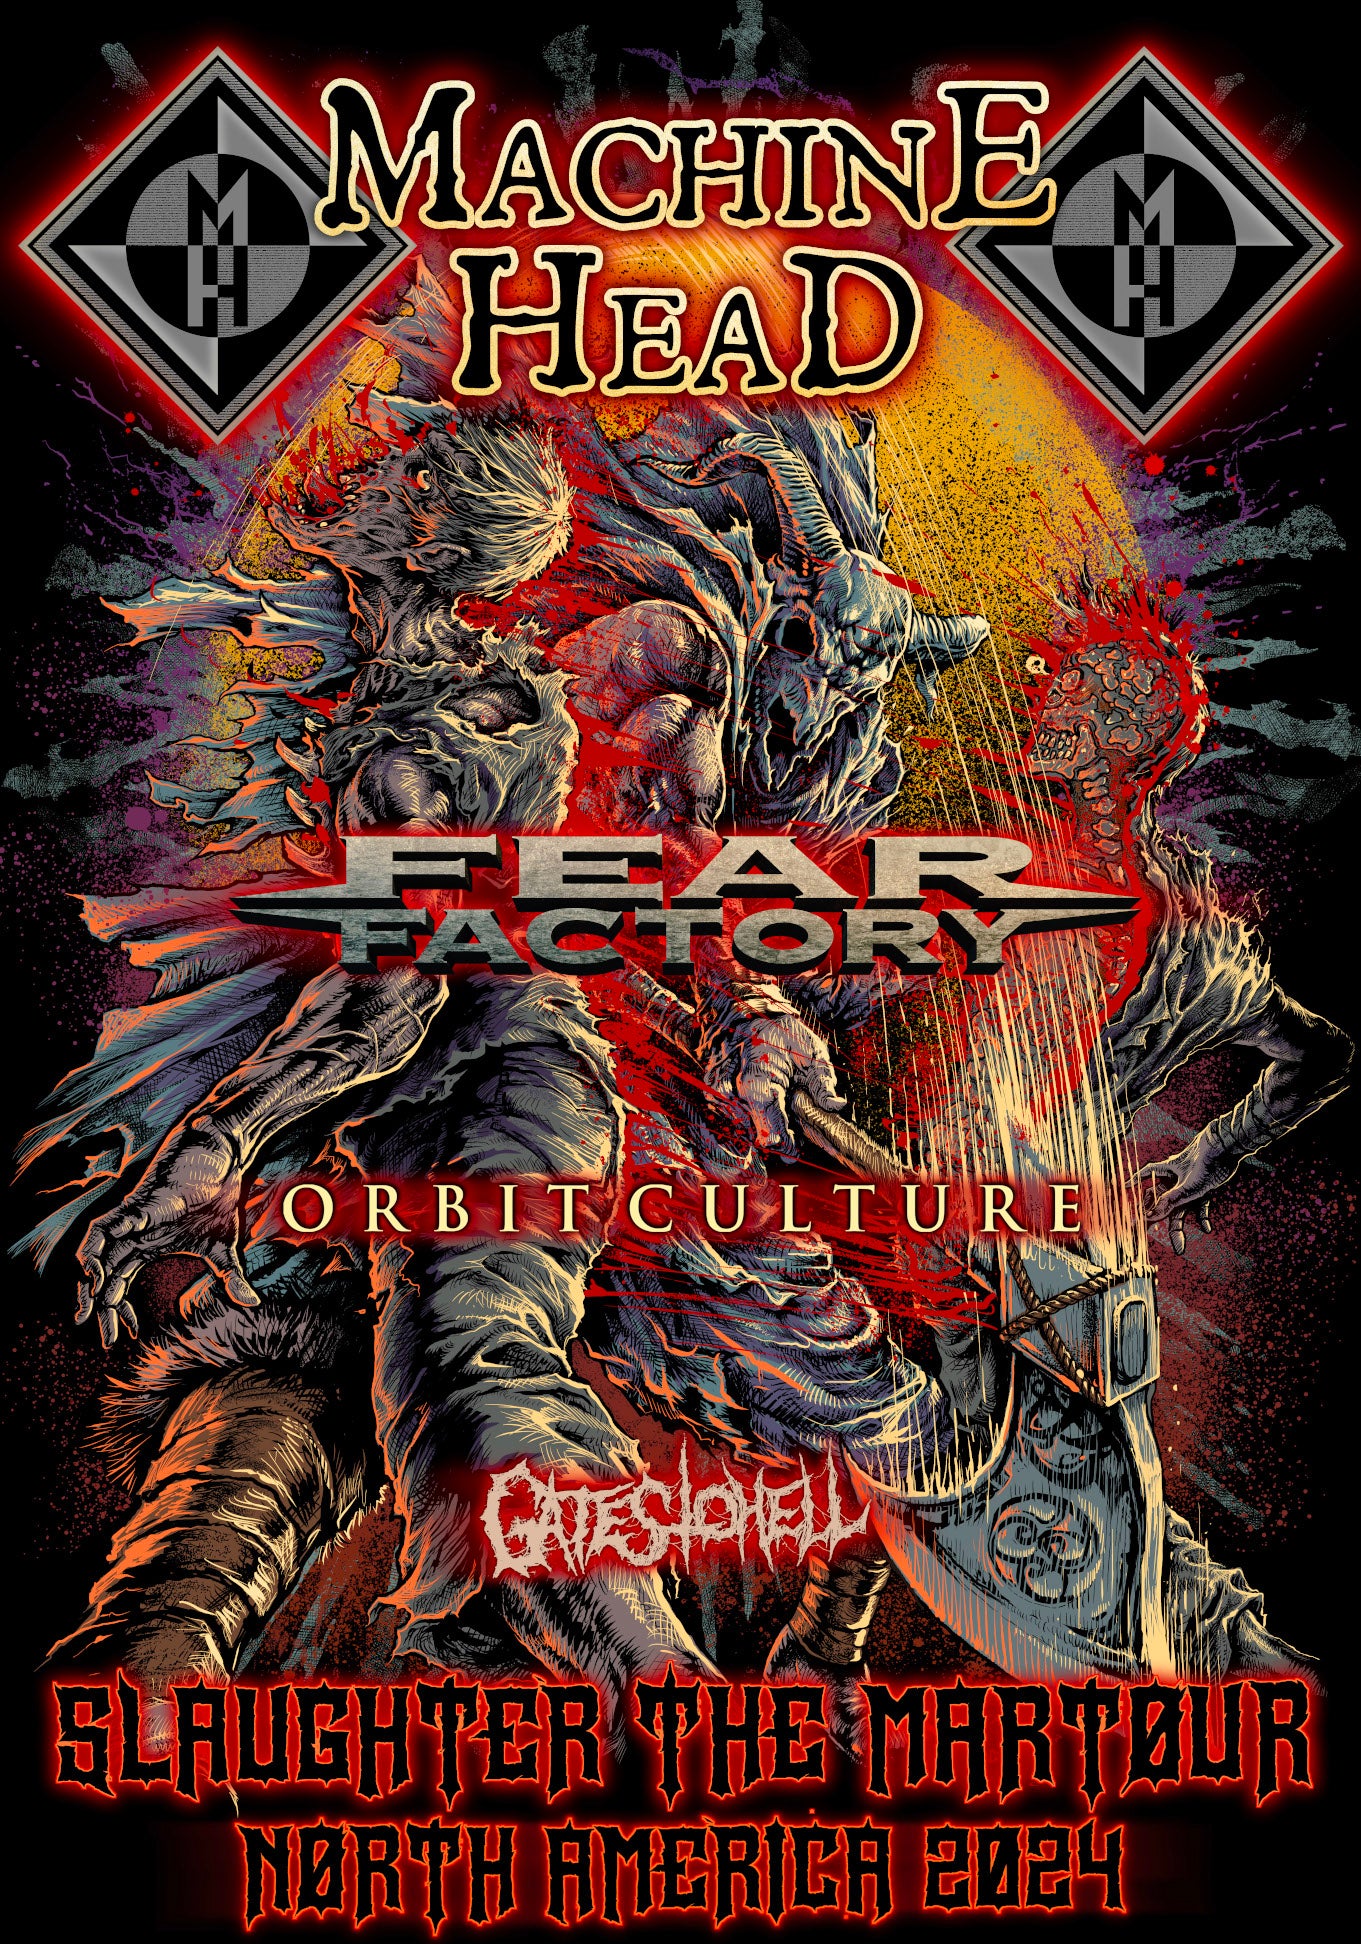 MACHINE HEAD  Heavy metal music, Rock band posters, Heavy metal bands